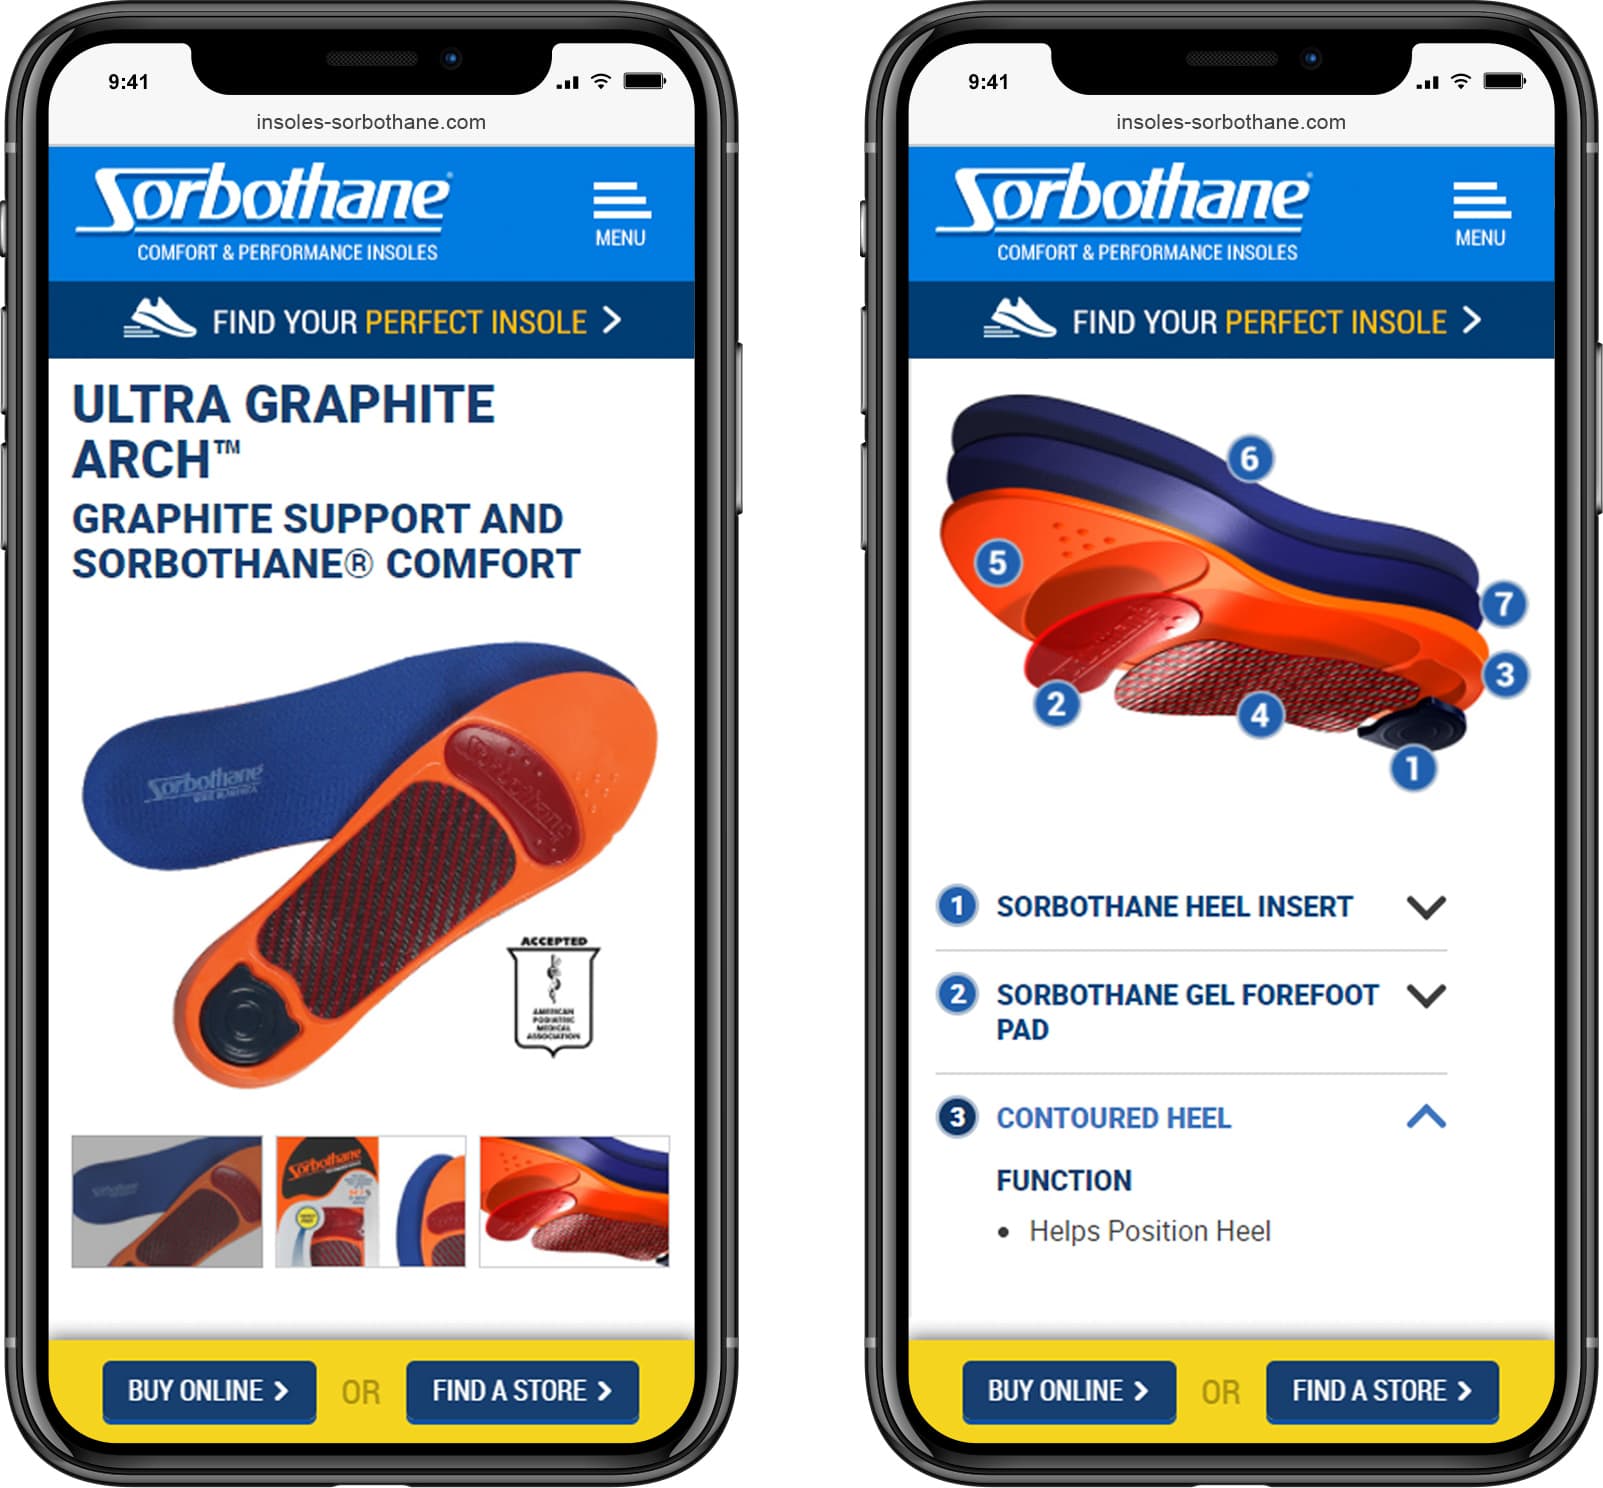 Sorbothane Insoles website product page design on mobile